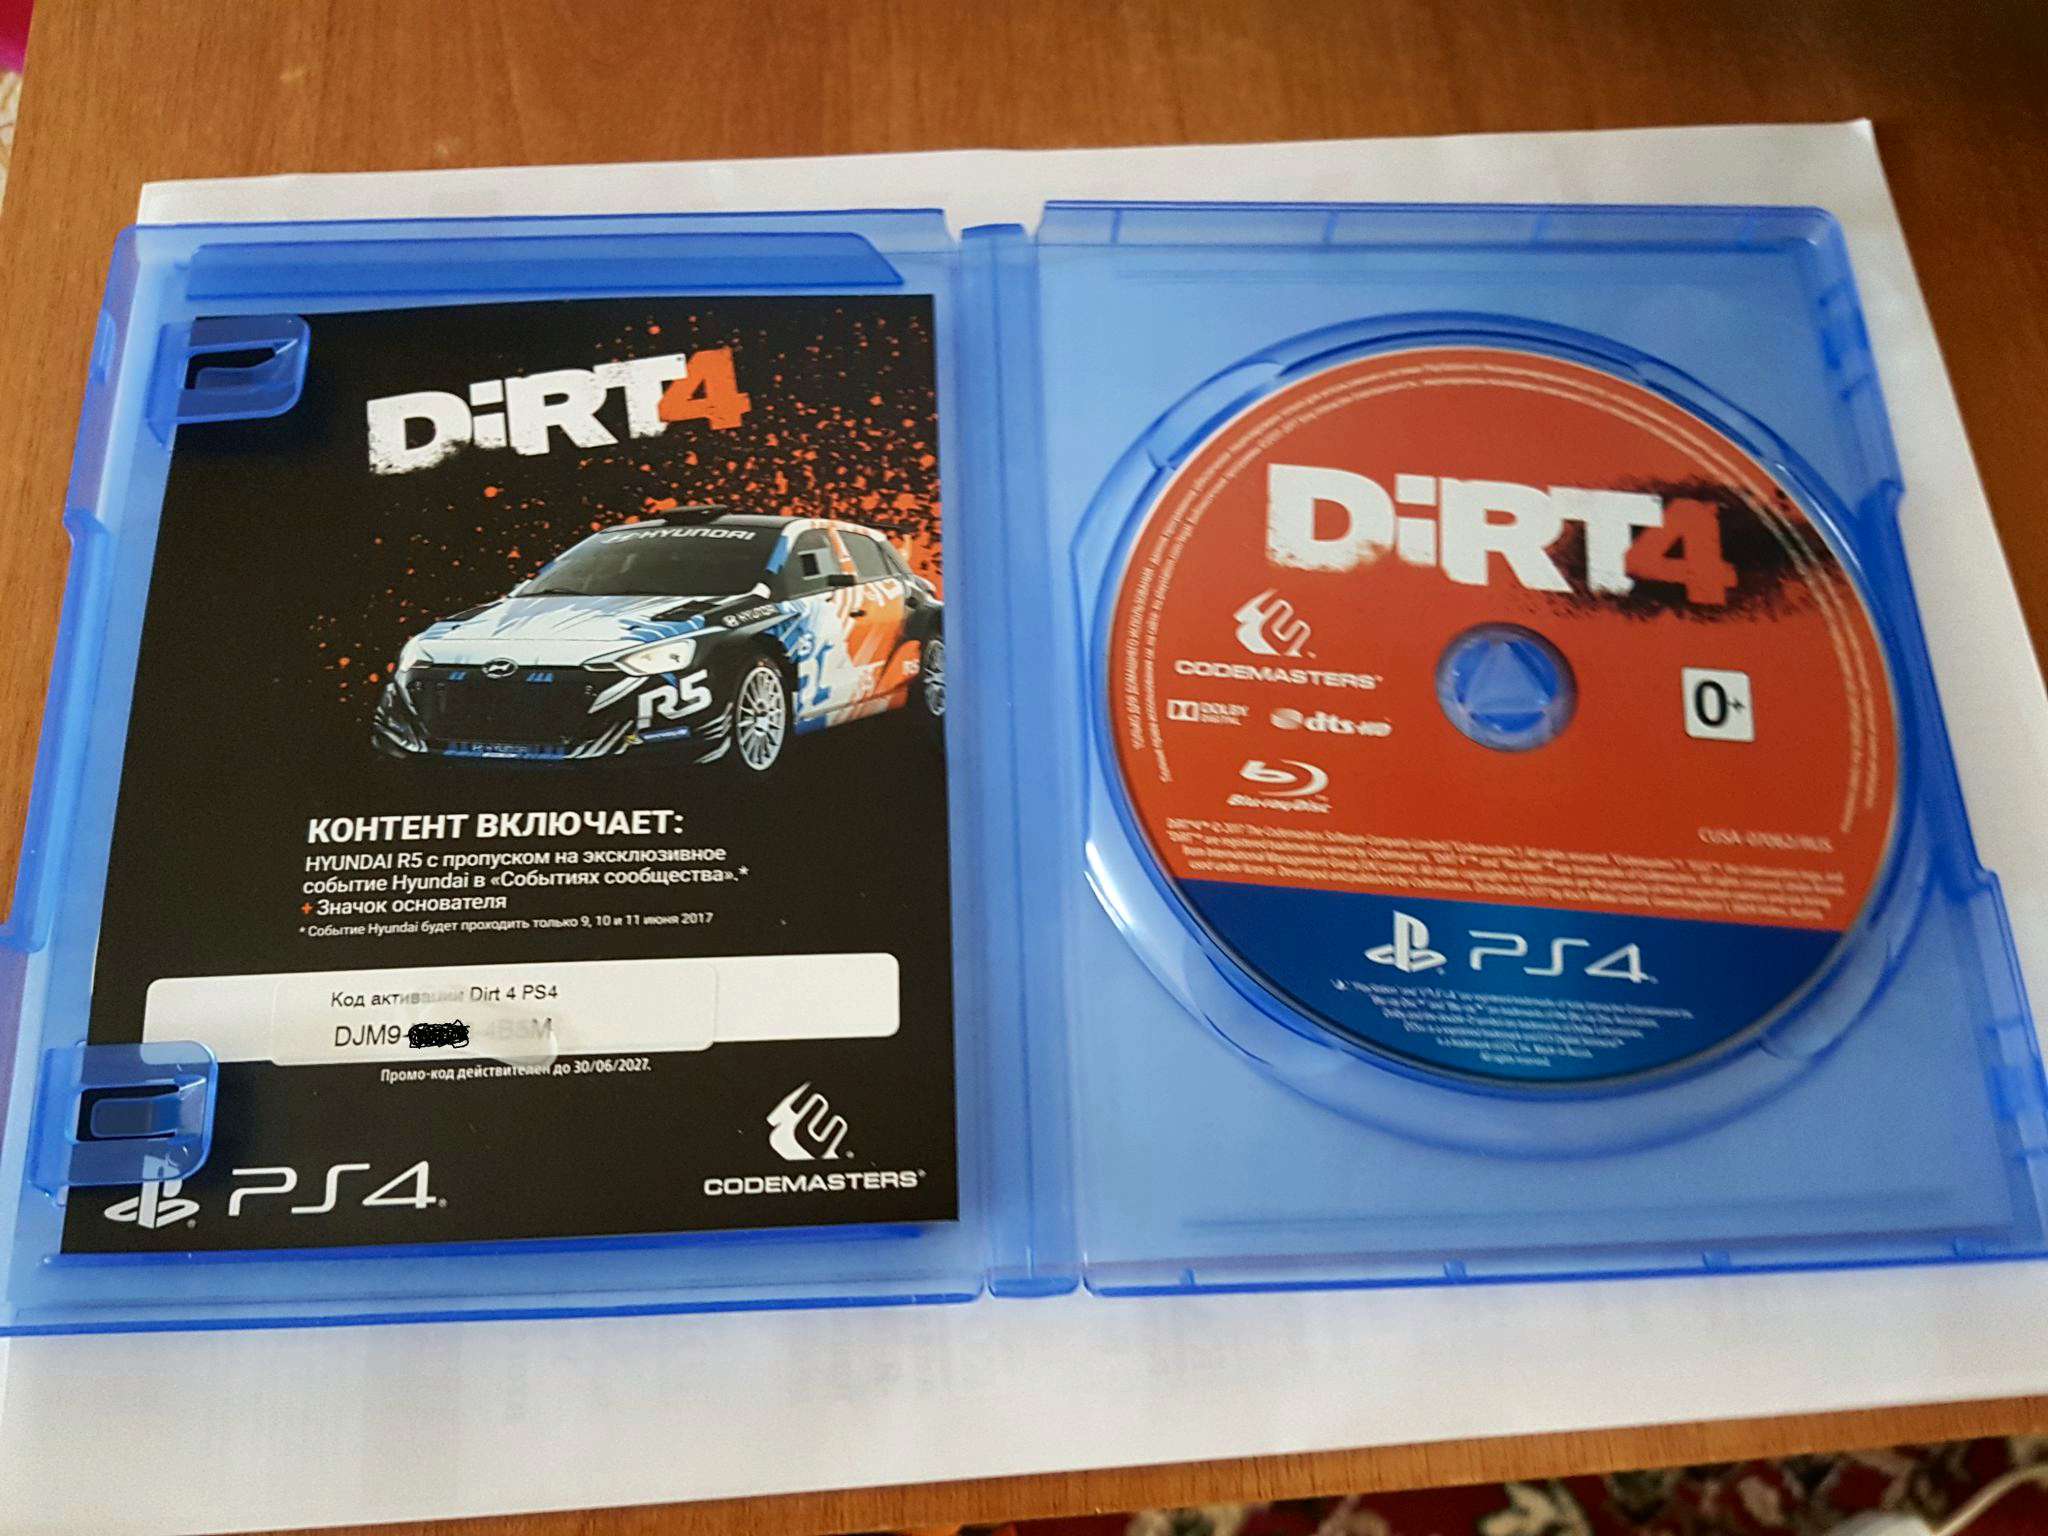 Dirt ps5. Dirt ps4. Игра Dirt 4 пс4. Dirt 4 ps4 диск. Dirt 4 ps4 Cover.